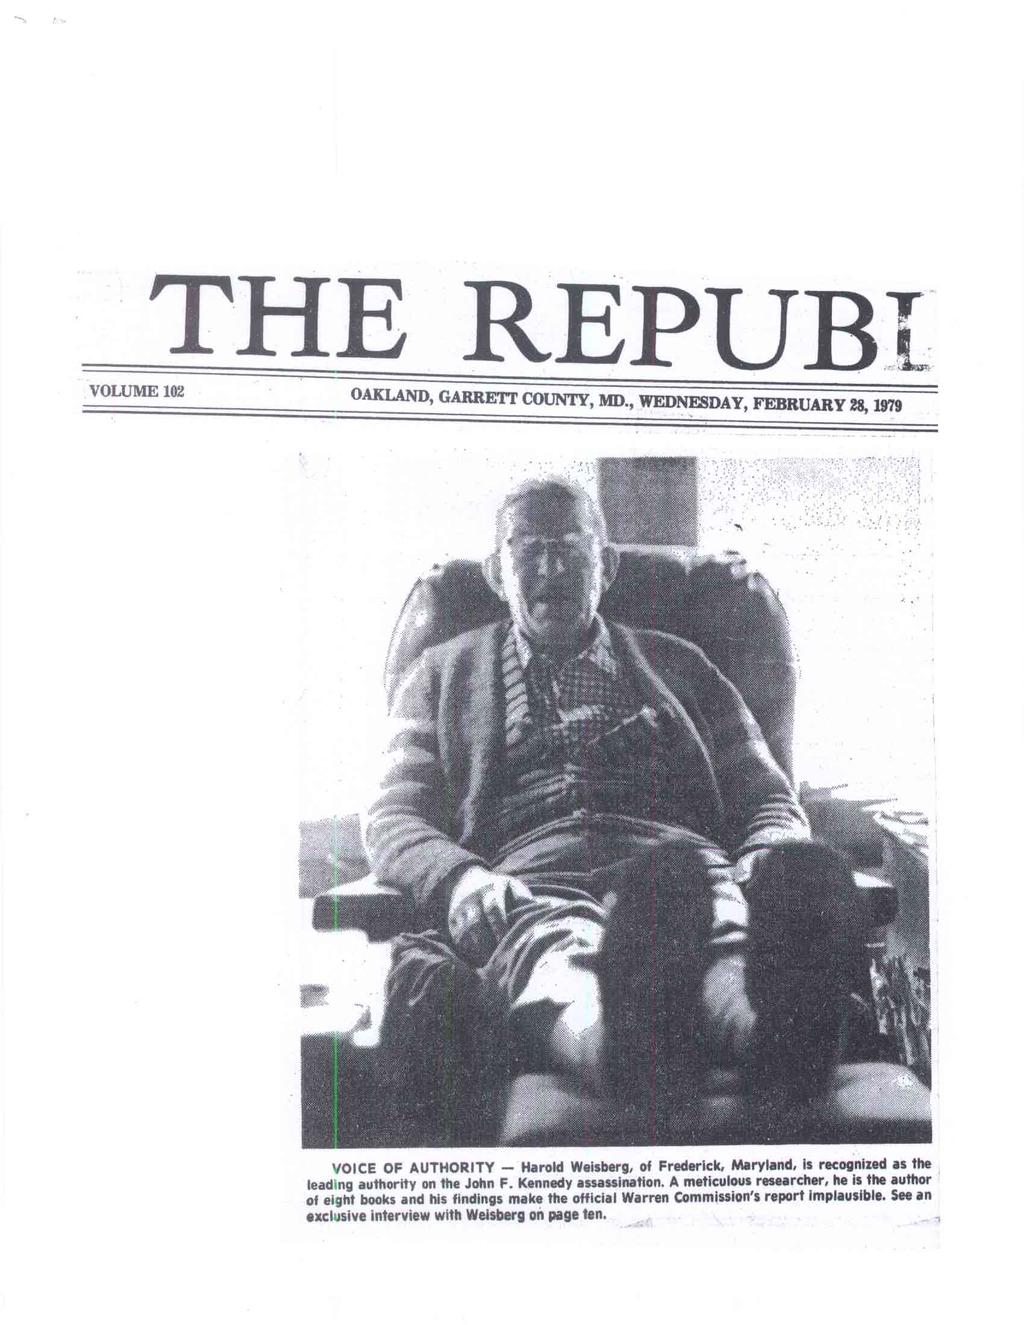 THE REPU T VOLUME 102 OAKLAND, GARRETT COUNTY, MD., WEDNESDAY, FEBRUARY 28, 1979 VOICE OF AUTHORITY Harold Weisberg, of Frederick, Maryland, is recognized as the leading authority on the John F.